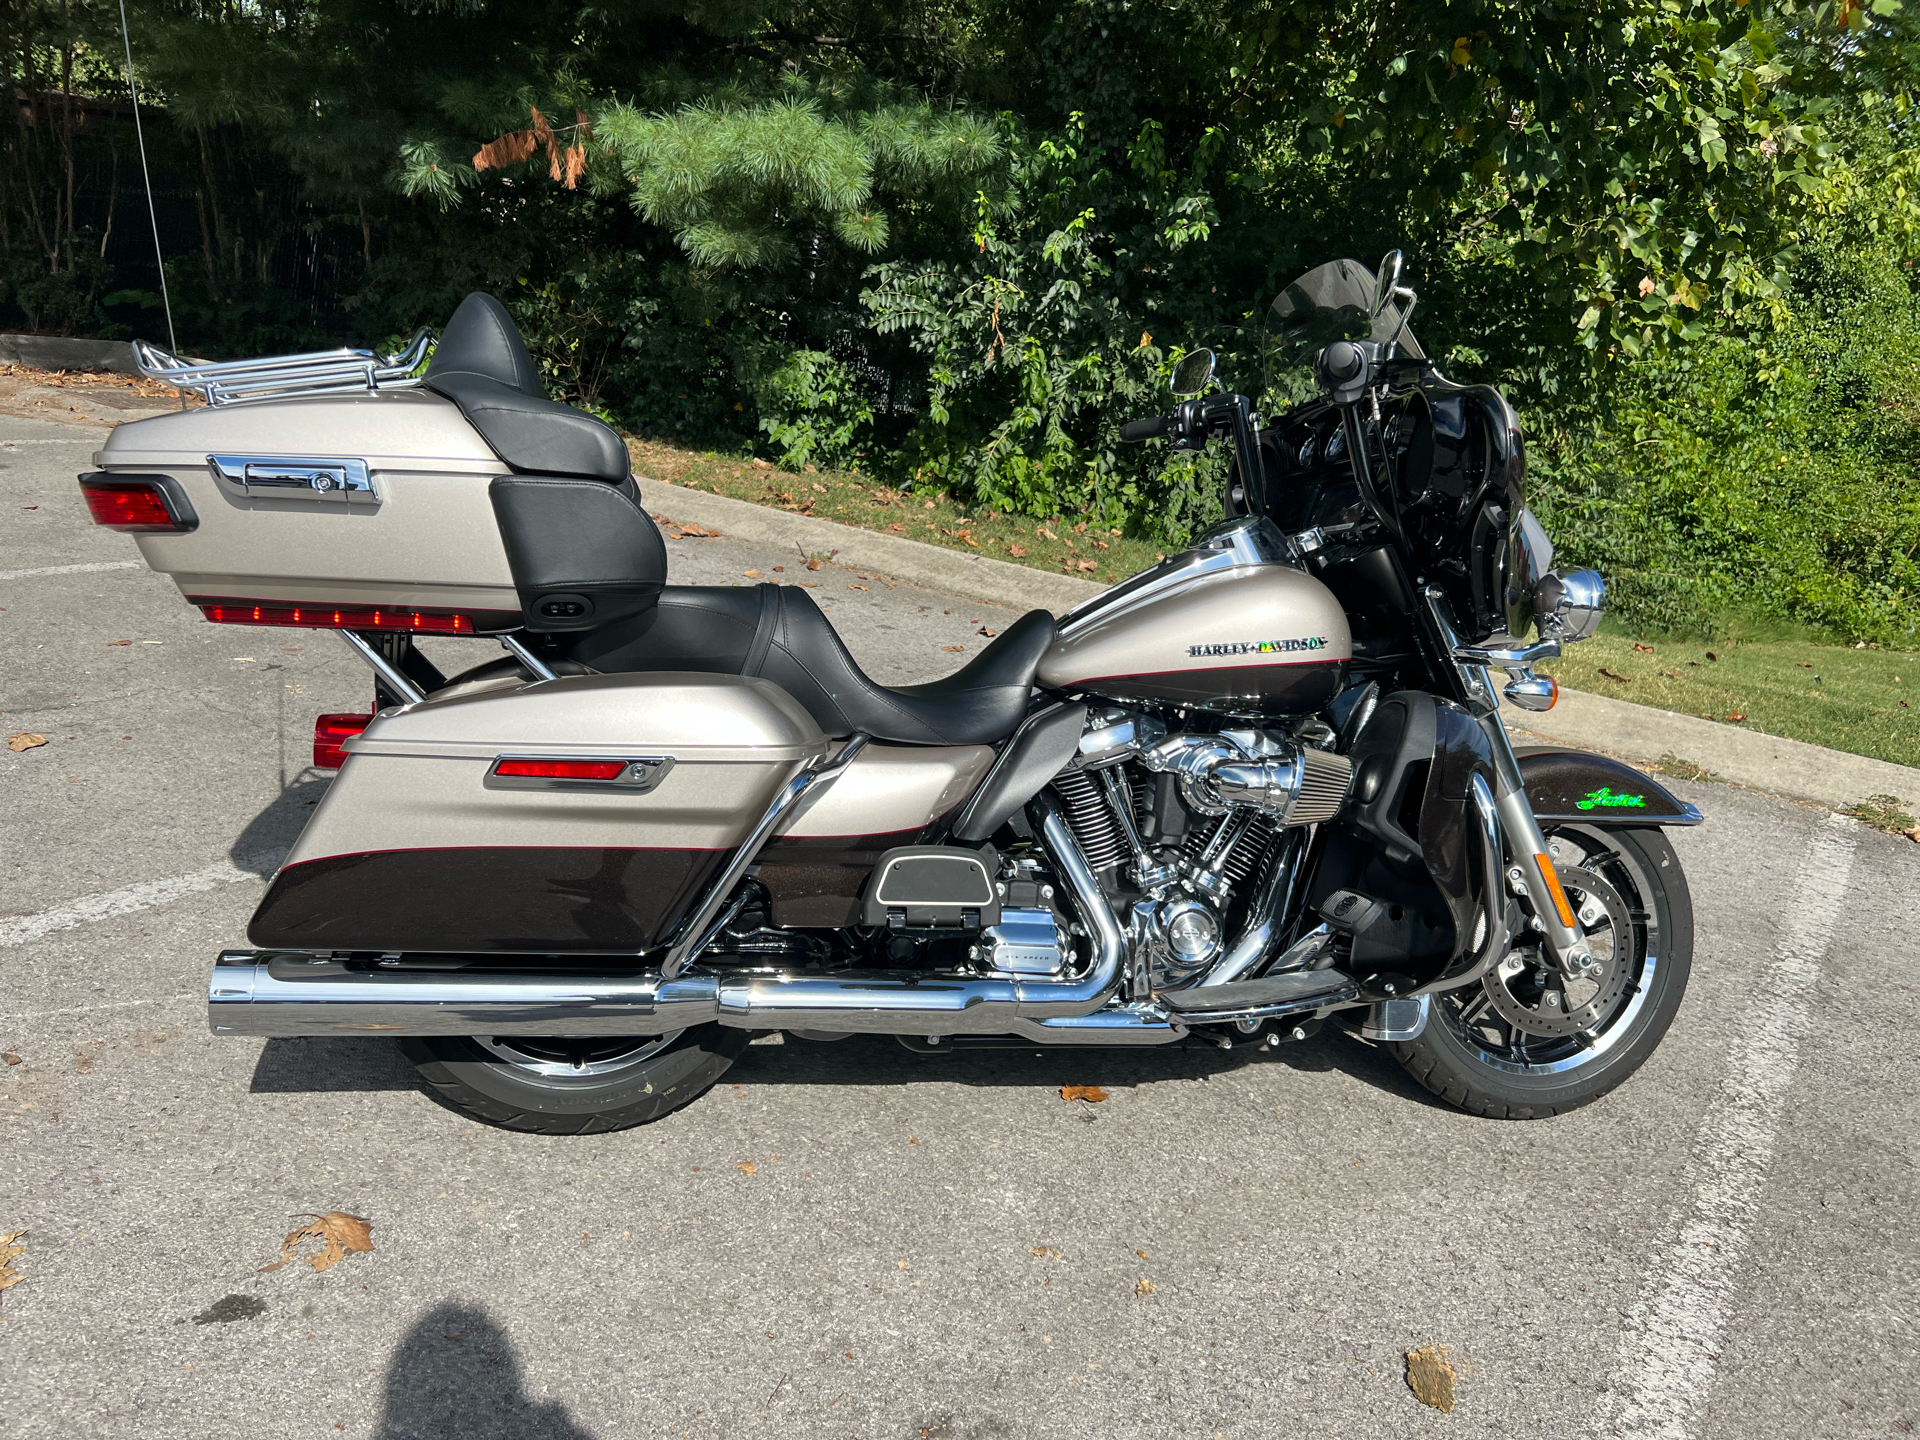 2018 Harley-Davidson Ultra Limited in Franklin, Tennessee - Photo 11